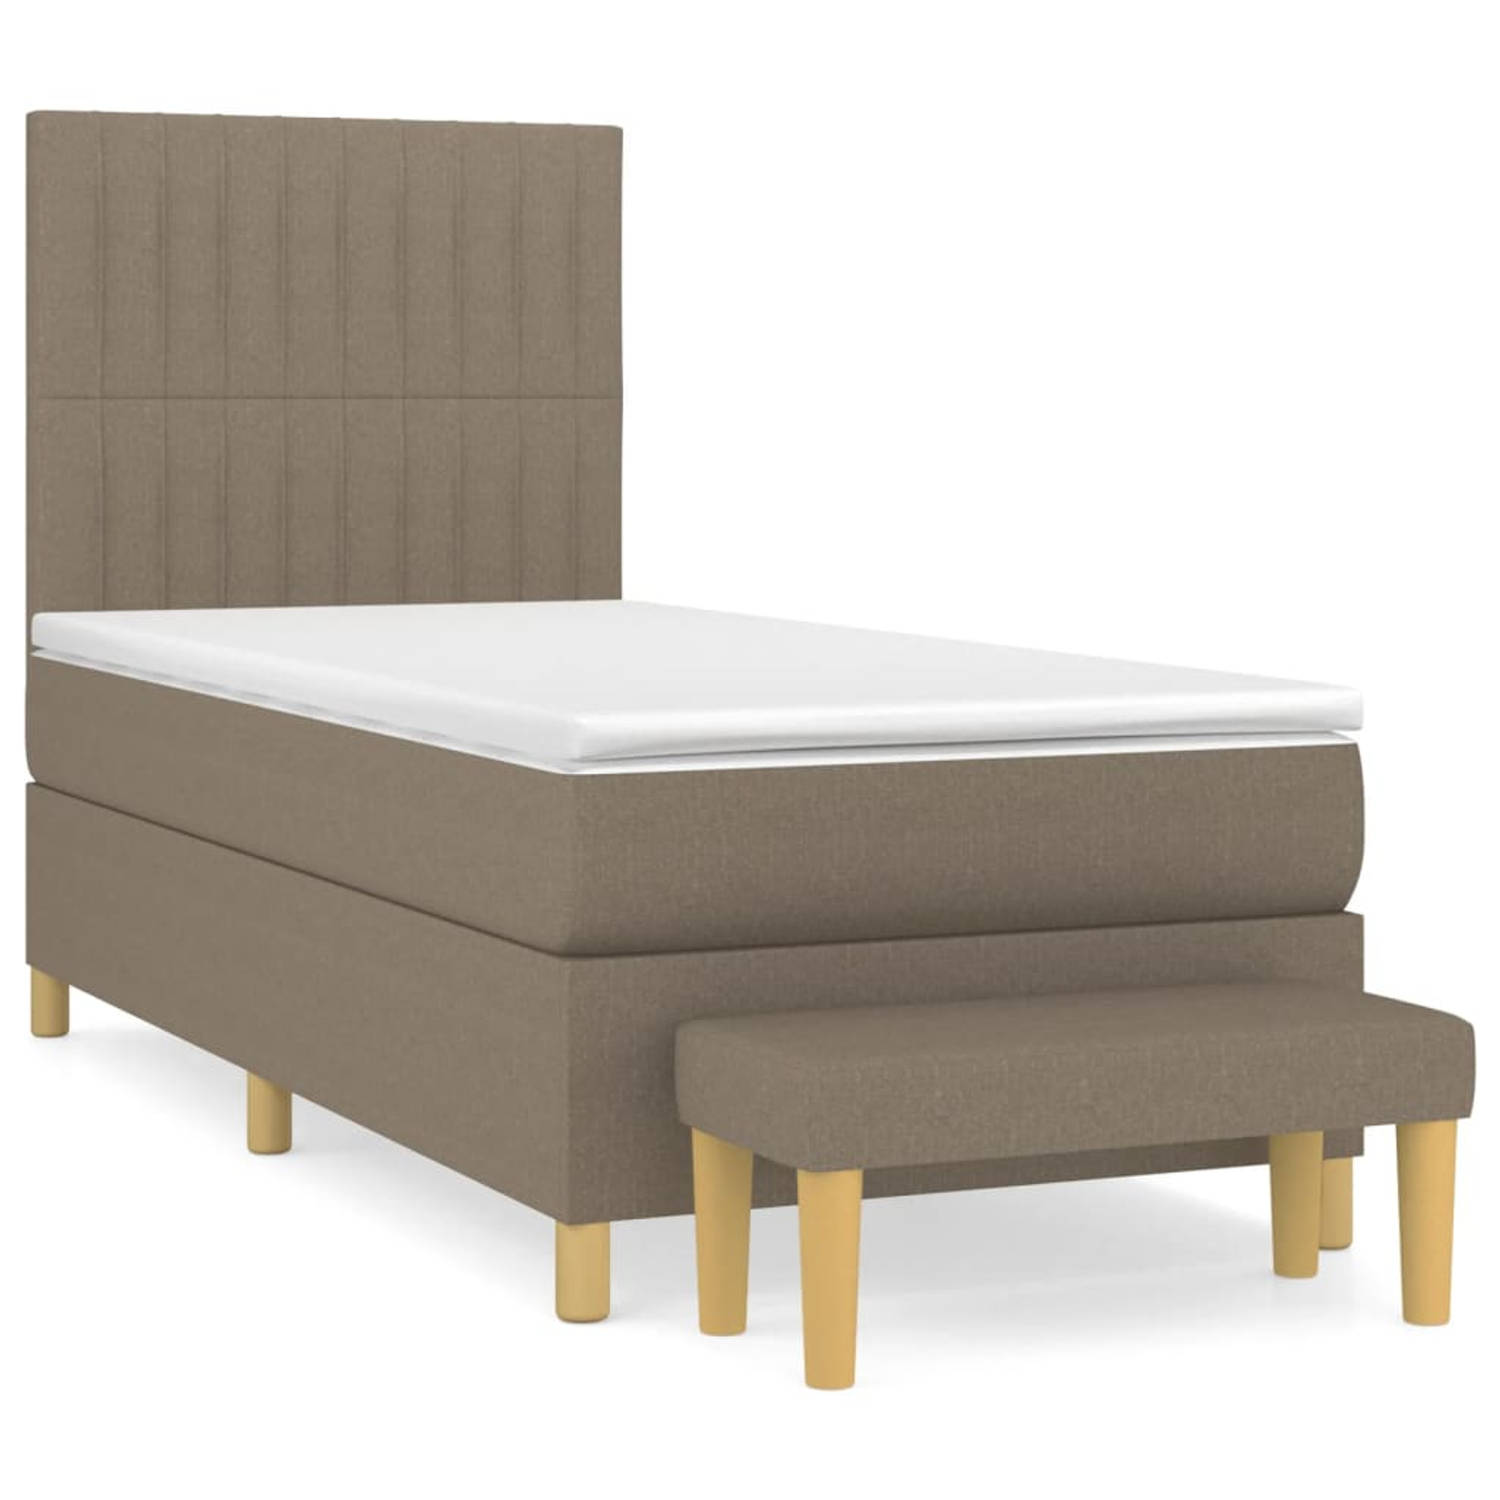 The Living Store Boxspring met matras stof taupe 90x200 cm - Boxspring - Boxsprings - Pocketveringbed - Bed - Slaapmeubel - Boxspringbed - Boxspring Bed - Eenpersoonsbed - Bed Met